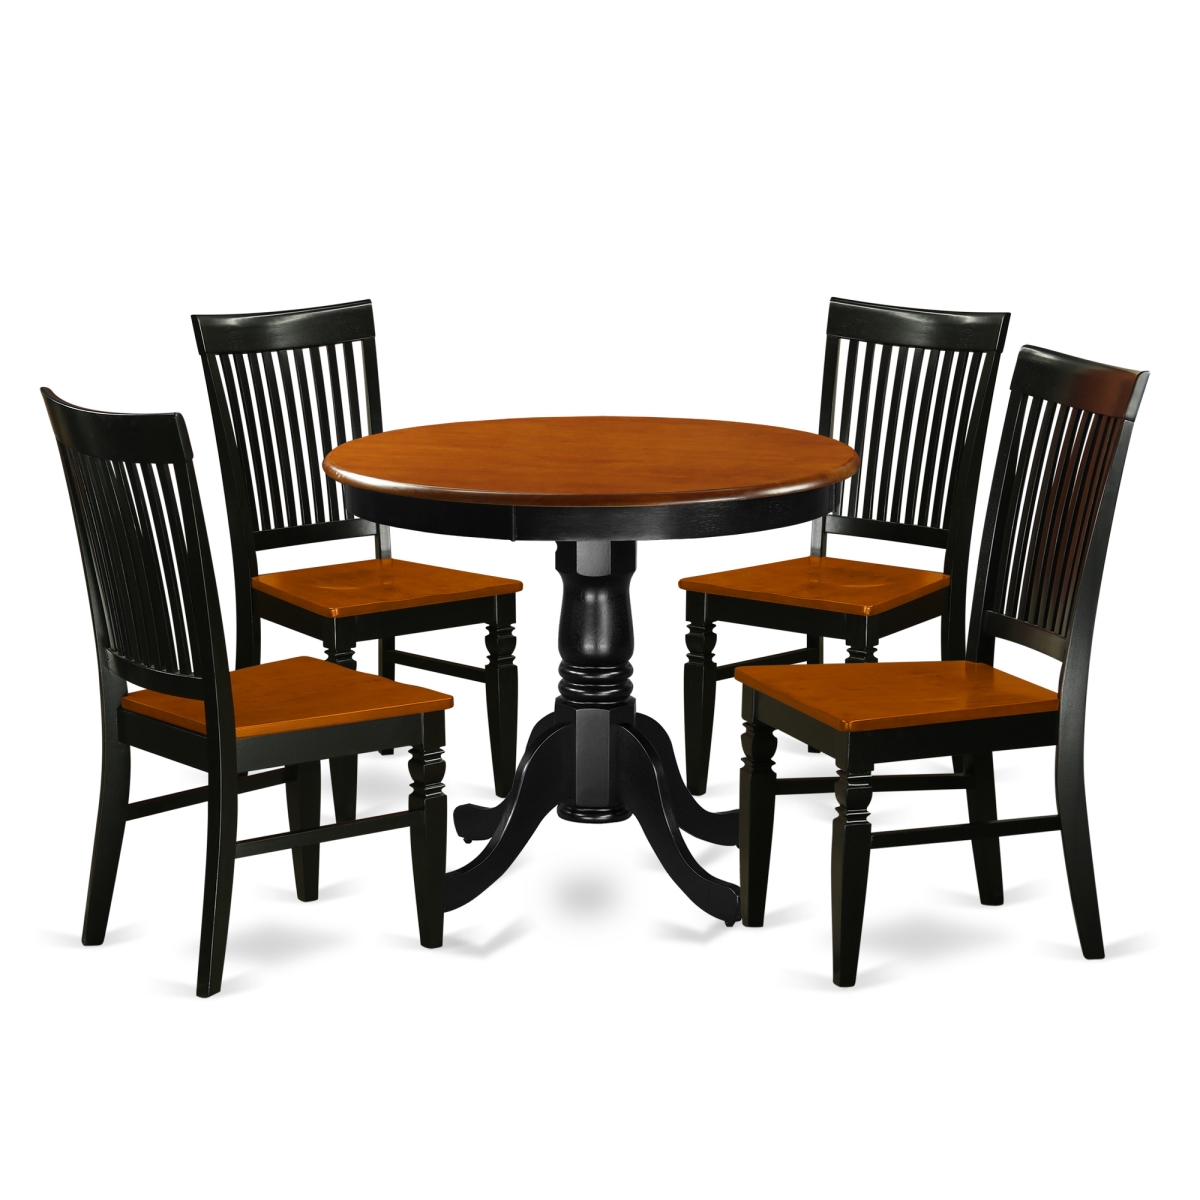 Picture of East West Furniture ANWE5-BCH-W Kitchen Table Set with a Dining Table & 4 Wood Seat Kitchen Chairs, 5 piece - Black & Cherry